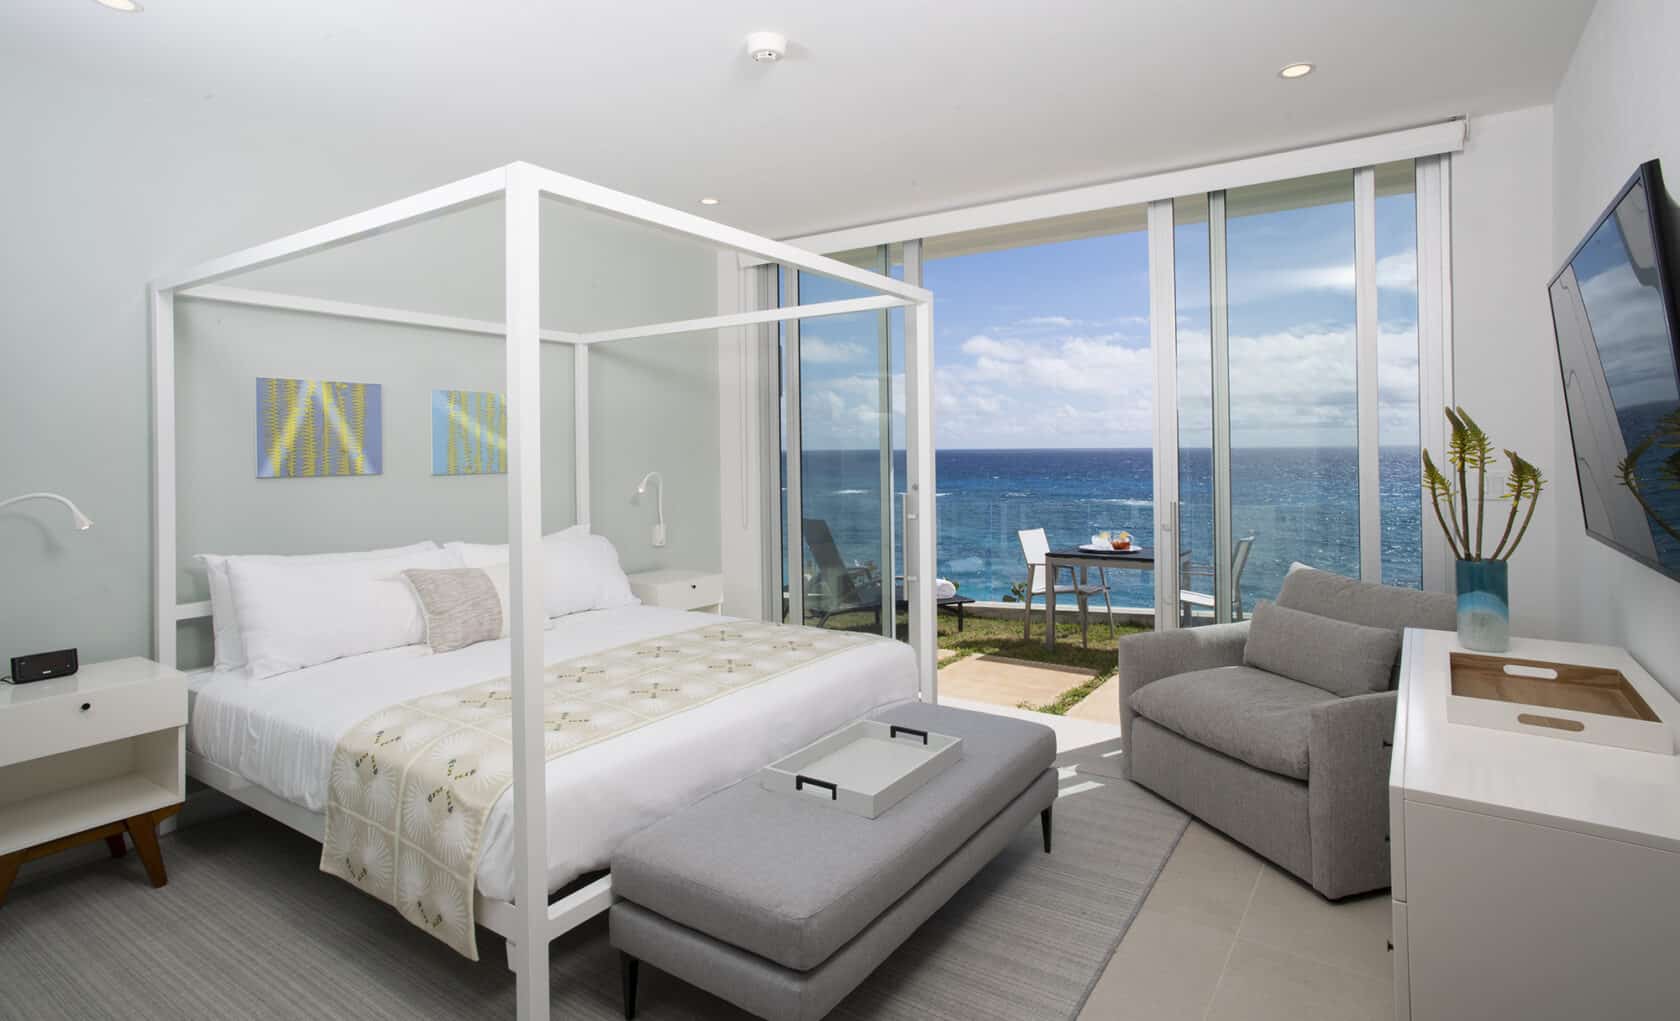 A bedroom with a four poster bed and an ocean view. Located in Bermuda residences.